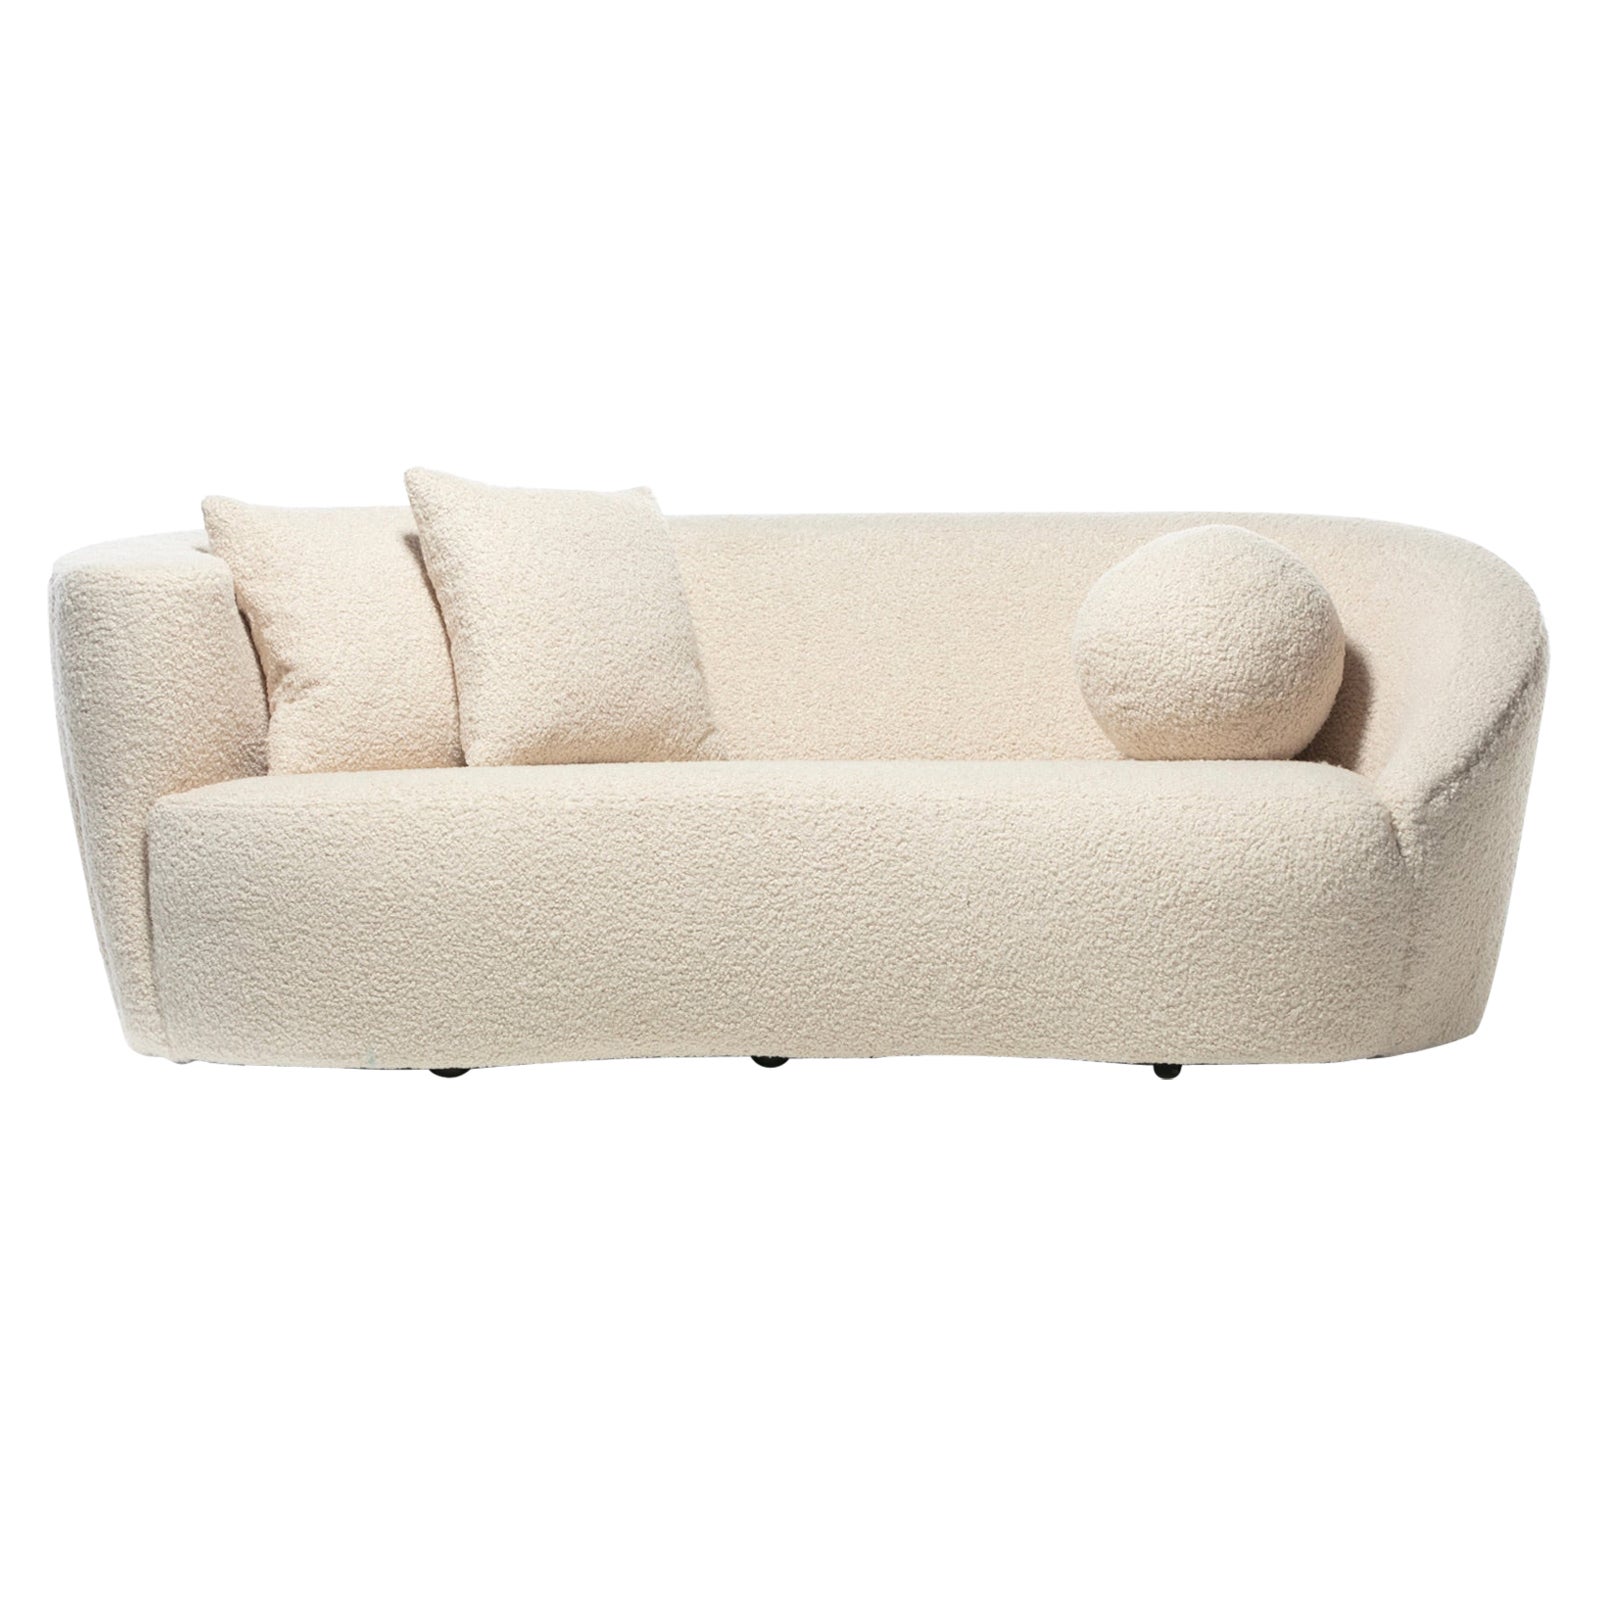 Vladimir Kagan Nautilus Sofa in Ivory White Bouclé by Directional, c. 1990 For Sale